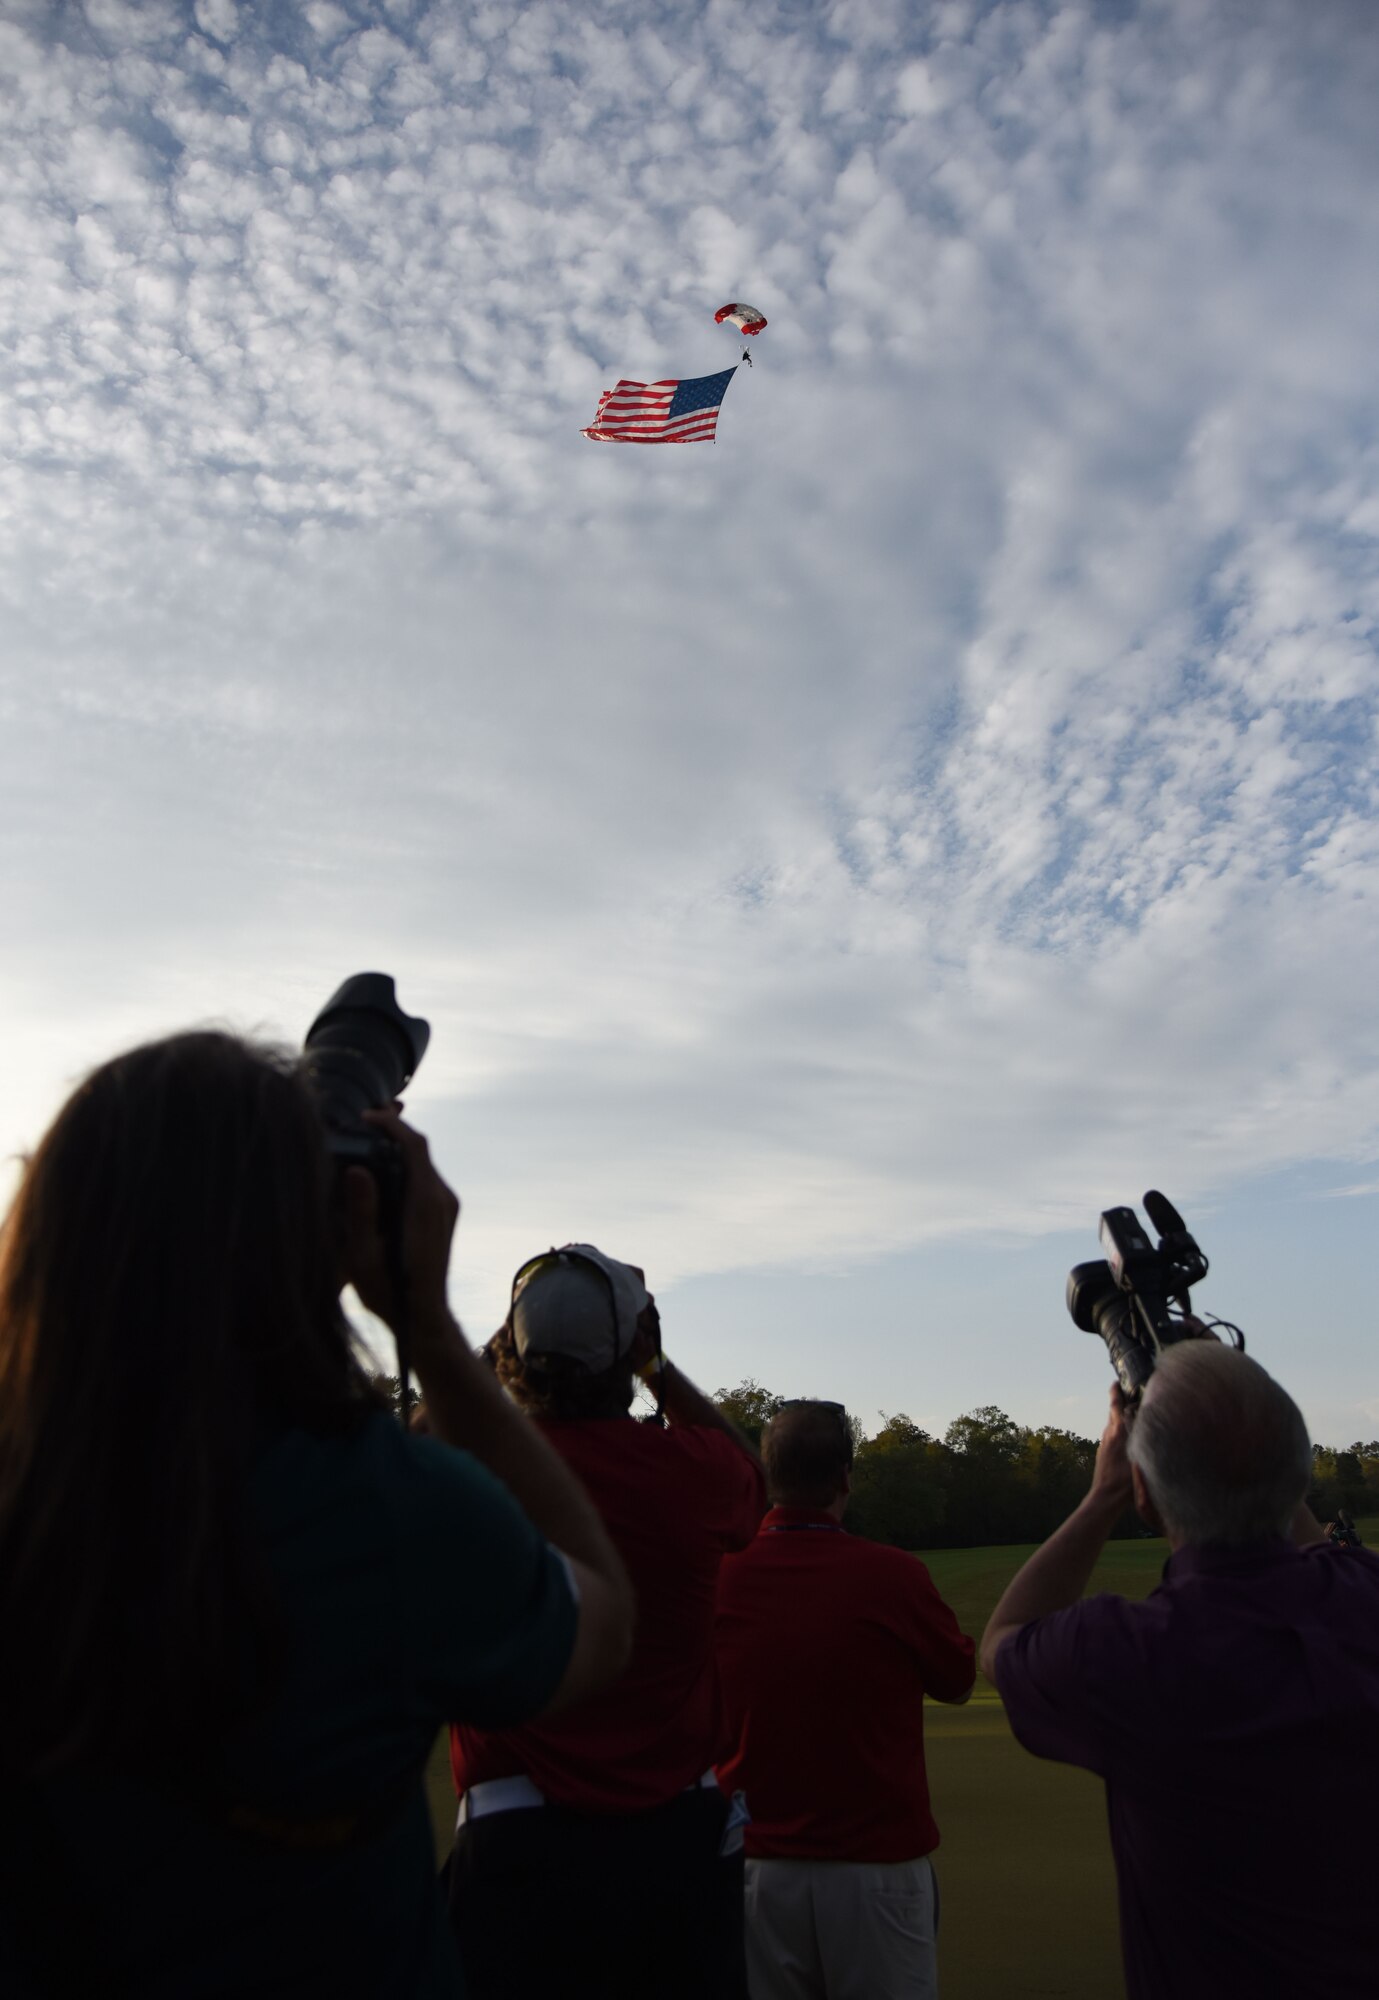 News cameras document retired U.S. Army Sgt. 1st Class Dana Bowman, a double amputee, parachute down while carrying the U.S. flag during the Rapiscan Systems Classic Champions Tour at Fallen Oak Golf Club March 25, 2018, in Saucier, Mississippi. Keesler personnel performed the national anthem and presented the colors during the closing ceremony of the three-day event. This is the fifth year that the event has been held on the coast. (U.S. Air Force photo by Kemberly Groue)